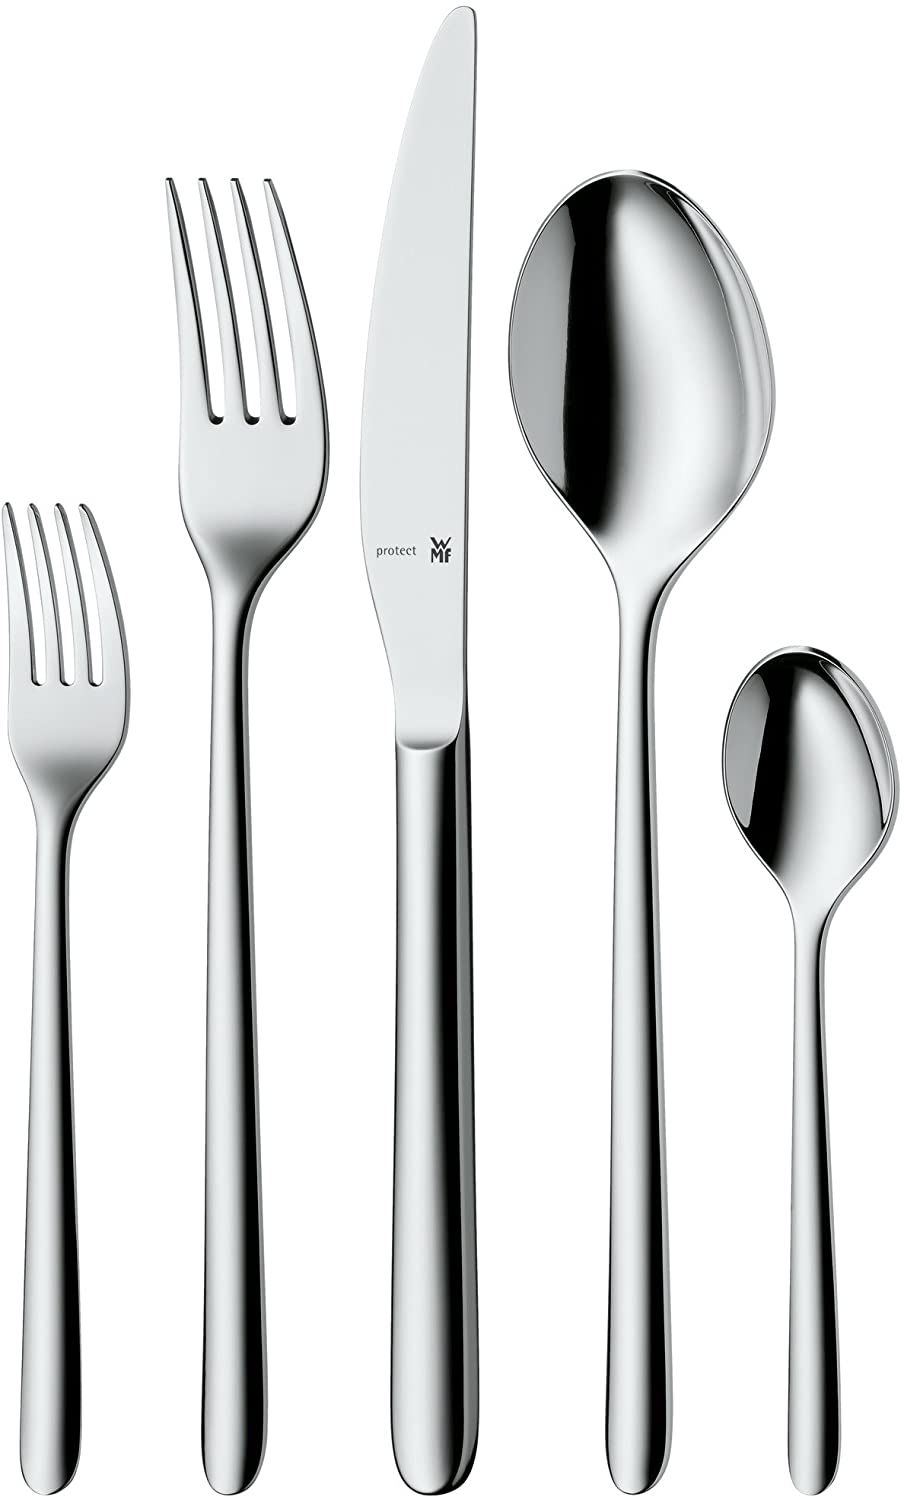 WMF Flame cutlery set, 12 people, 60 pieces, monobloc knife, Cromargan protect stainless steel, polished, shiny, scratch-resistant, dishwasher-safe